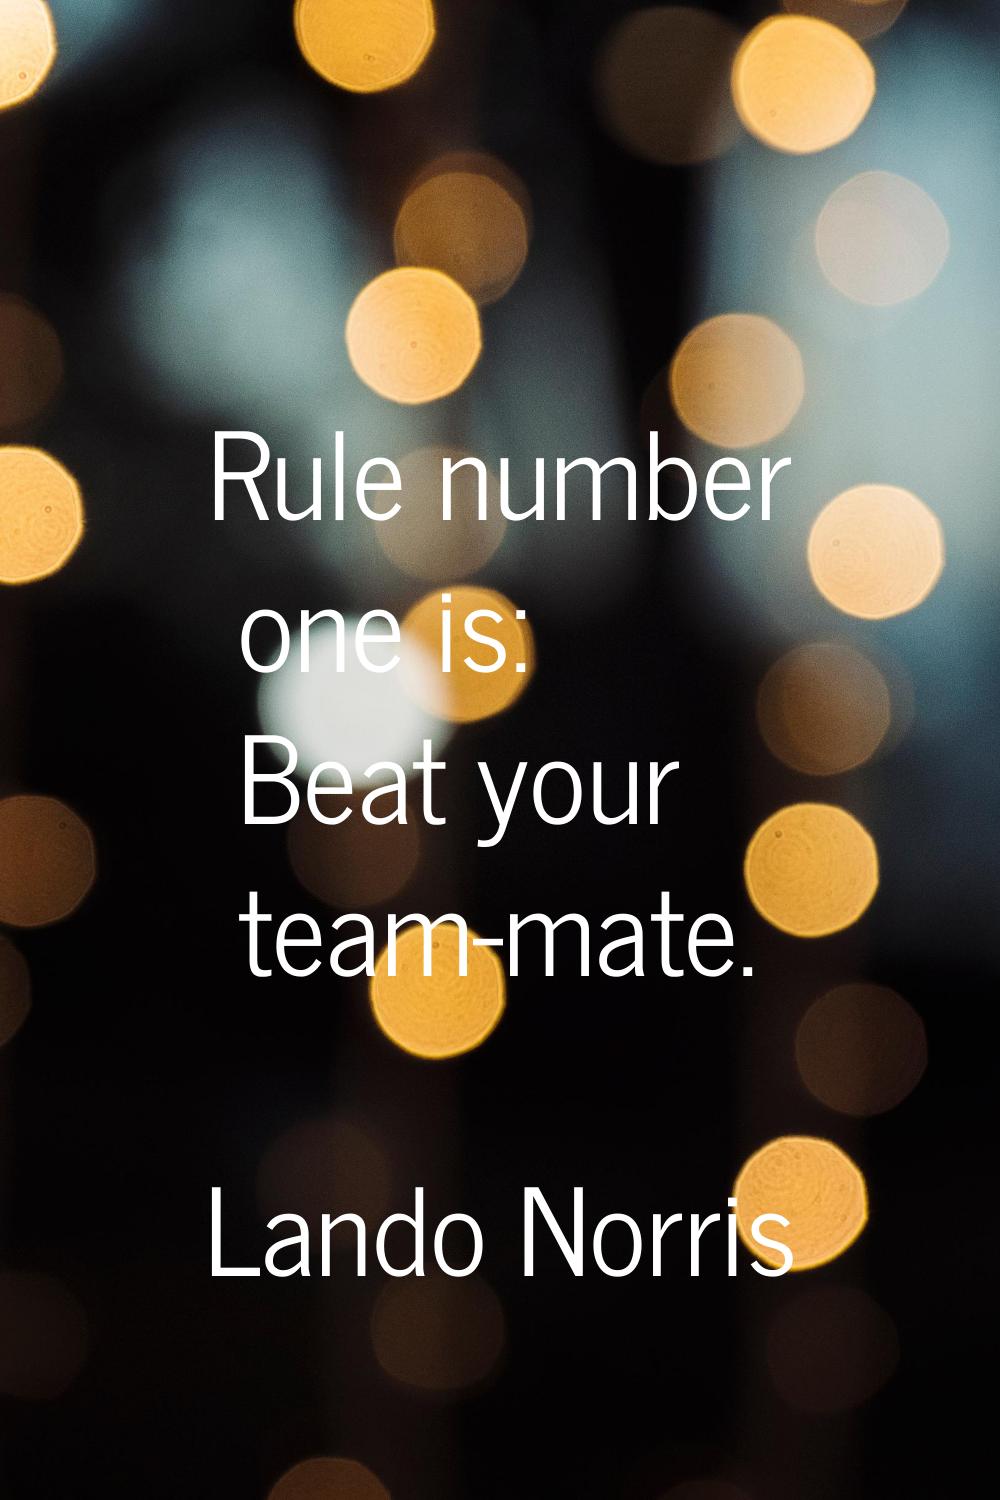 Rule number one is: Beat your team-mate.